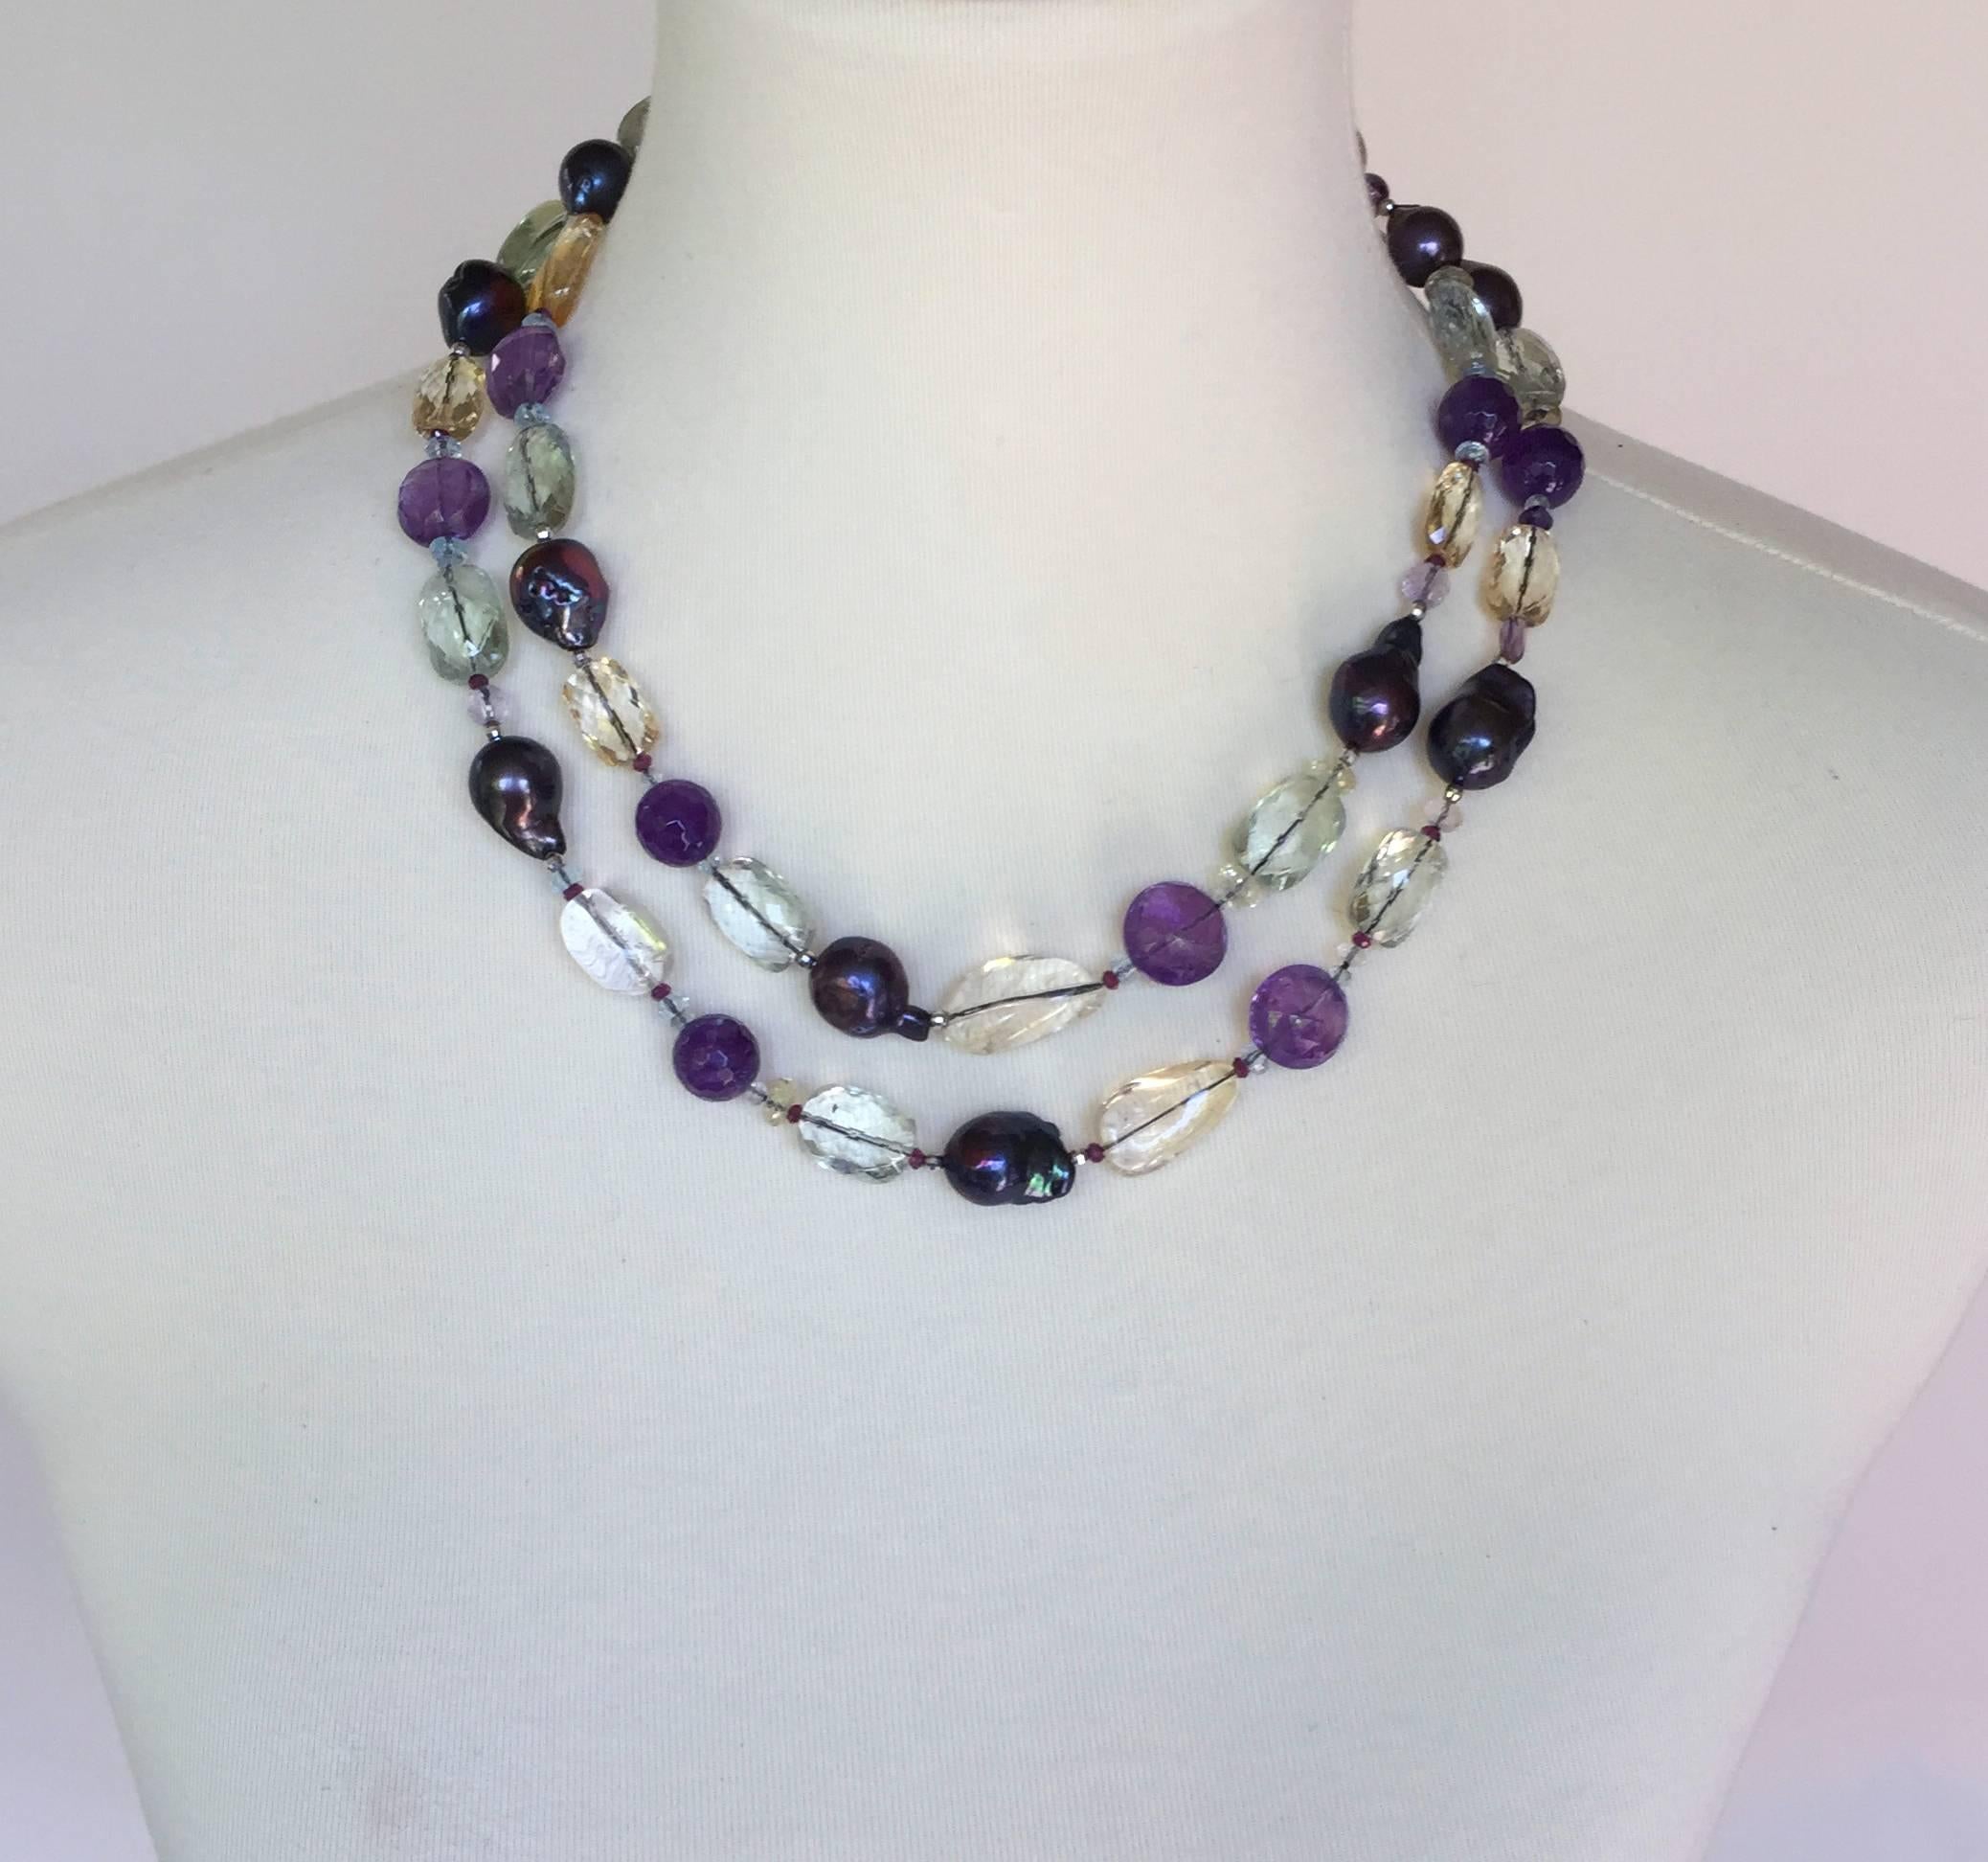 Large Baroque black pearls are paired with Citrine, Amethyst, Aquamarine, and Blue Topaz faceted and nugget beads to create a gorgeous shimmering piece. The colored stones highlight the luster and iridescence of the cultured pearls, unifying the